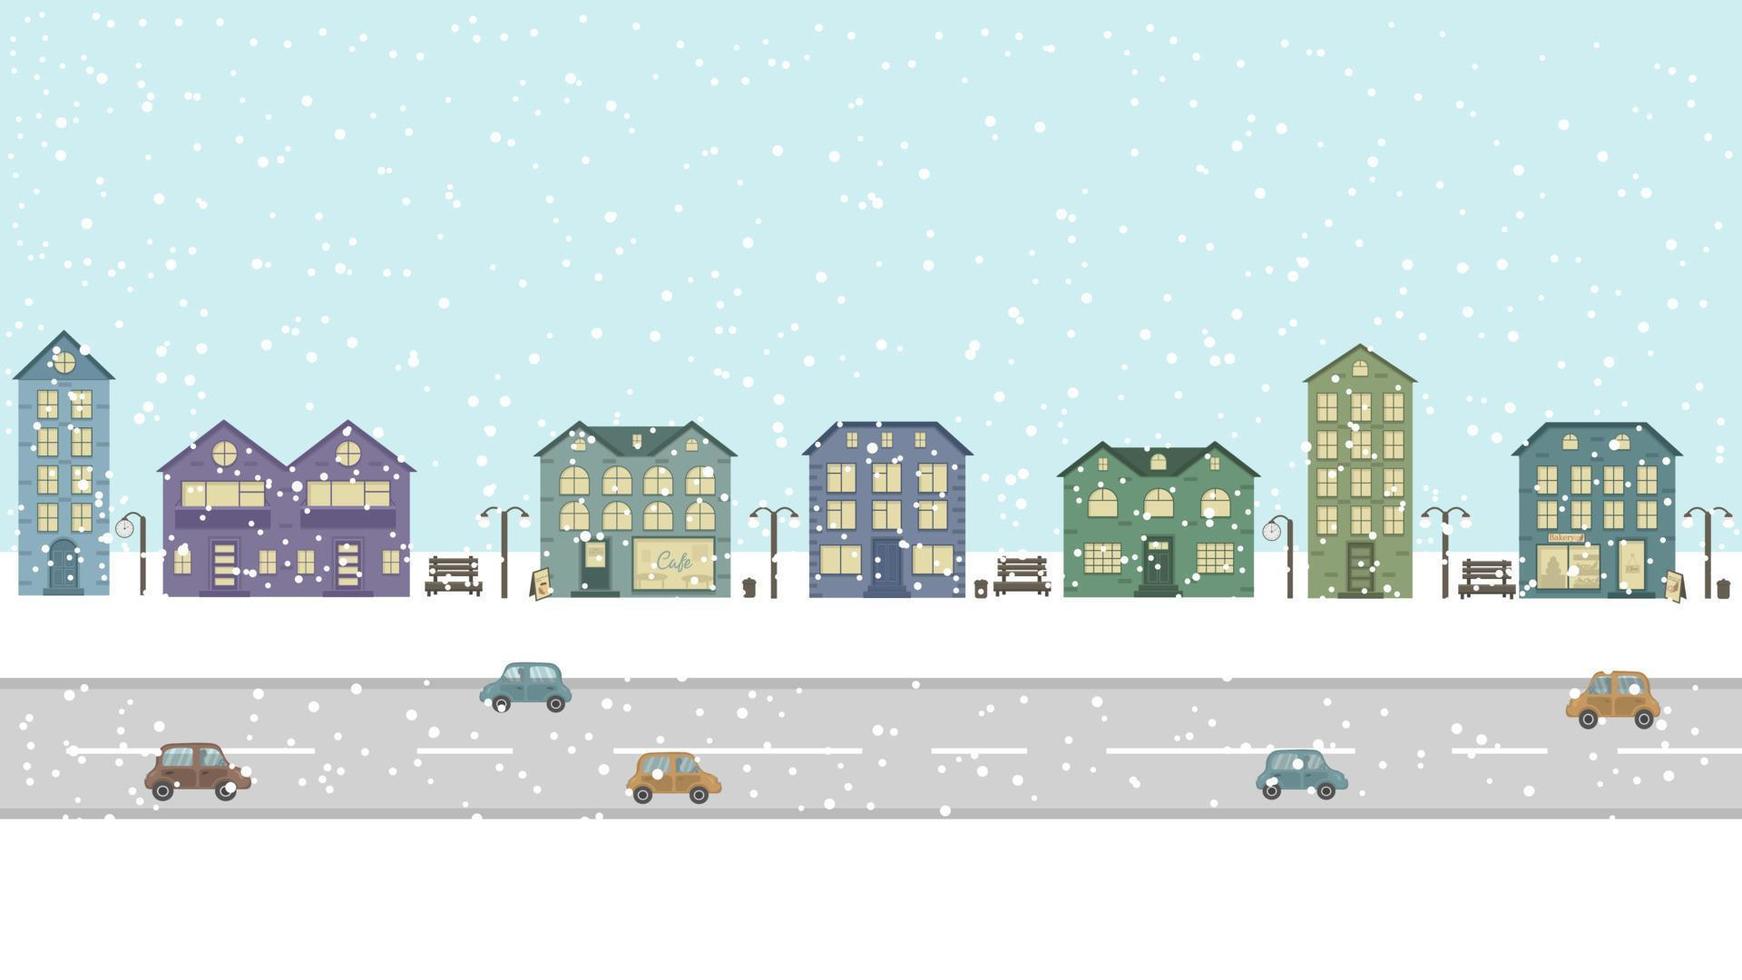 Panoramic view of the street with houses and the road with cars. Winter snowy city. Illustration with buildings and urban details. People's houses and a coffee shop and a bakery between them. vector